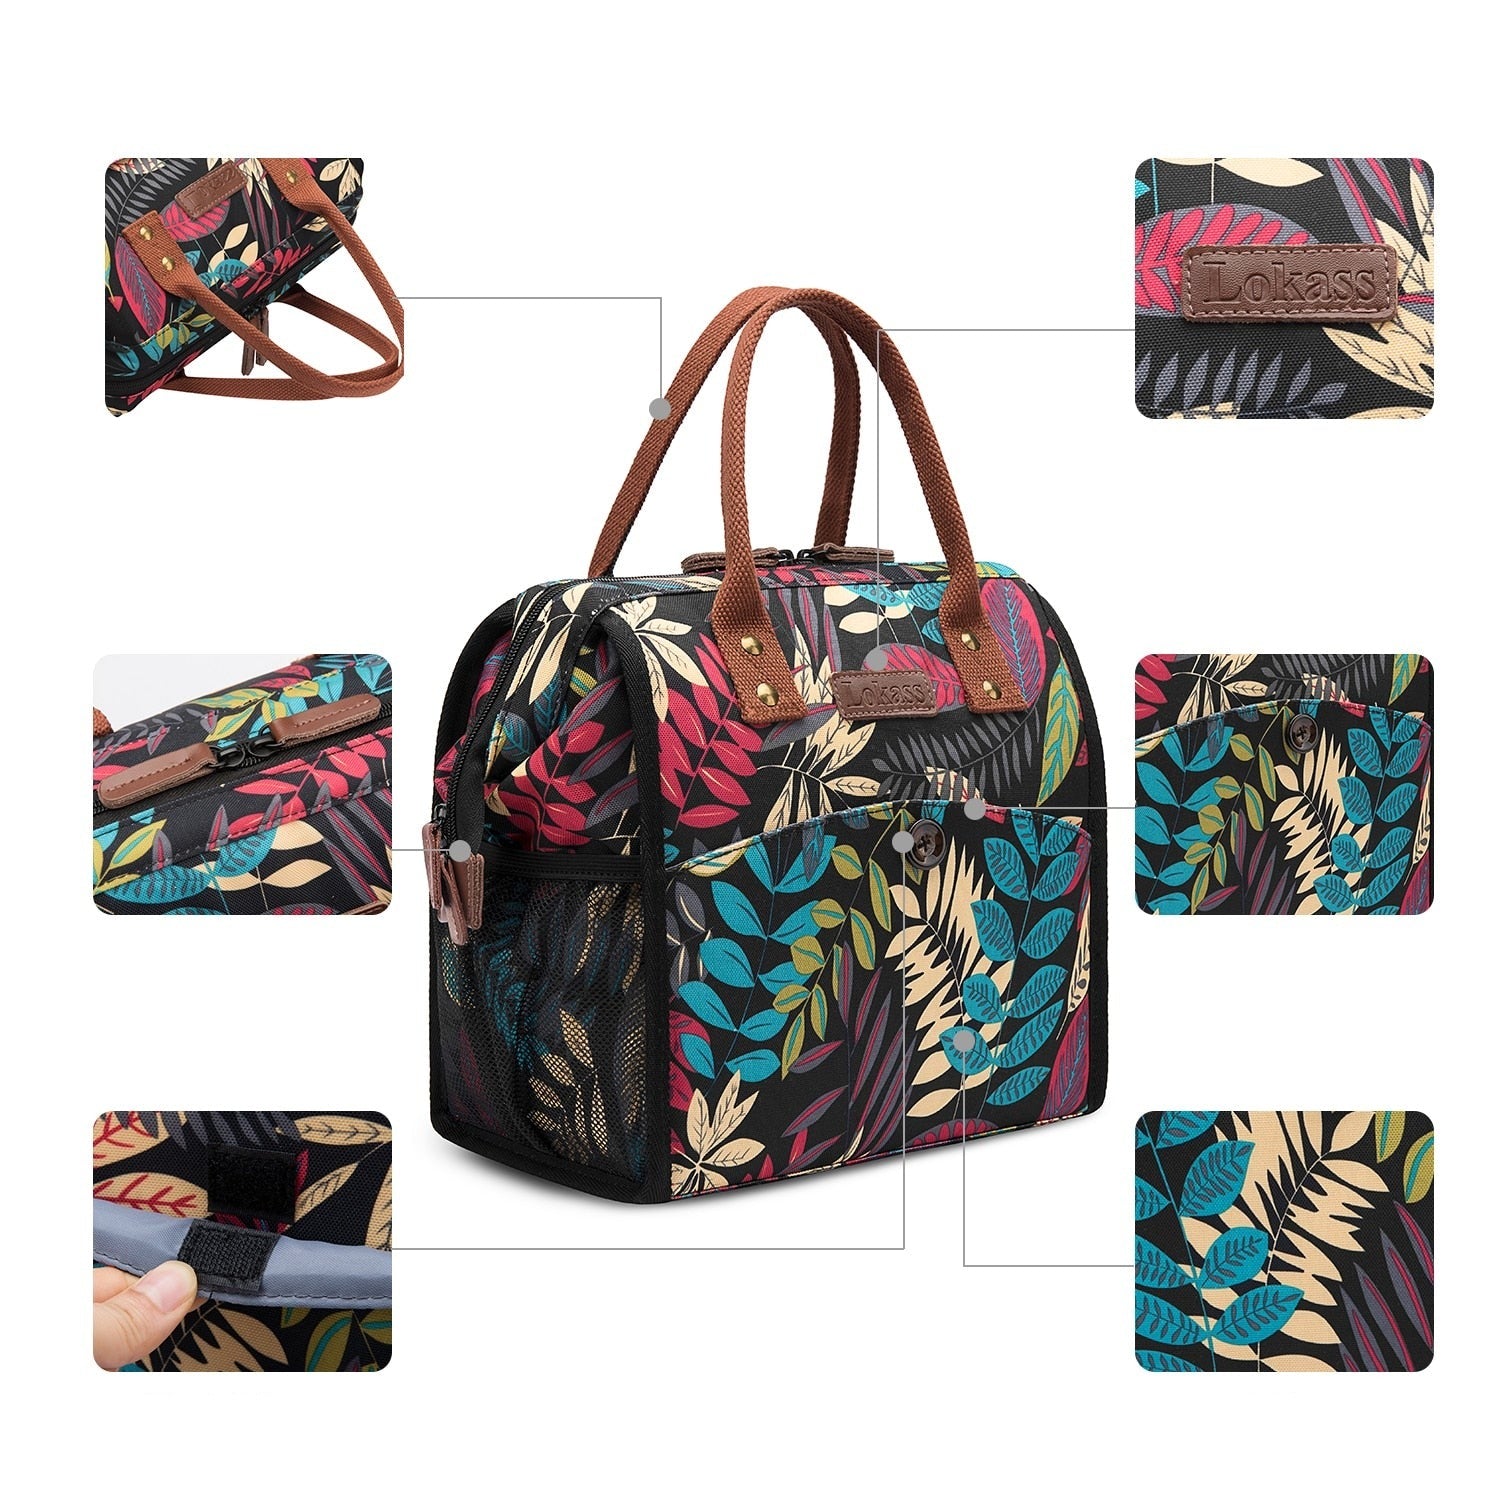 Sac Isotherme Repas Feuilles Multicolore